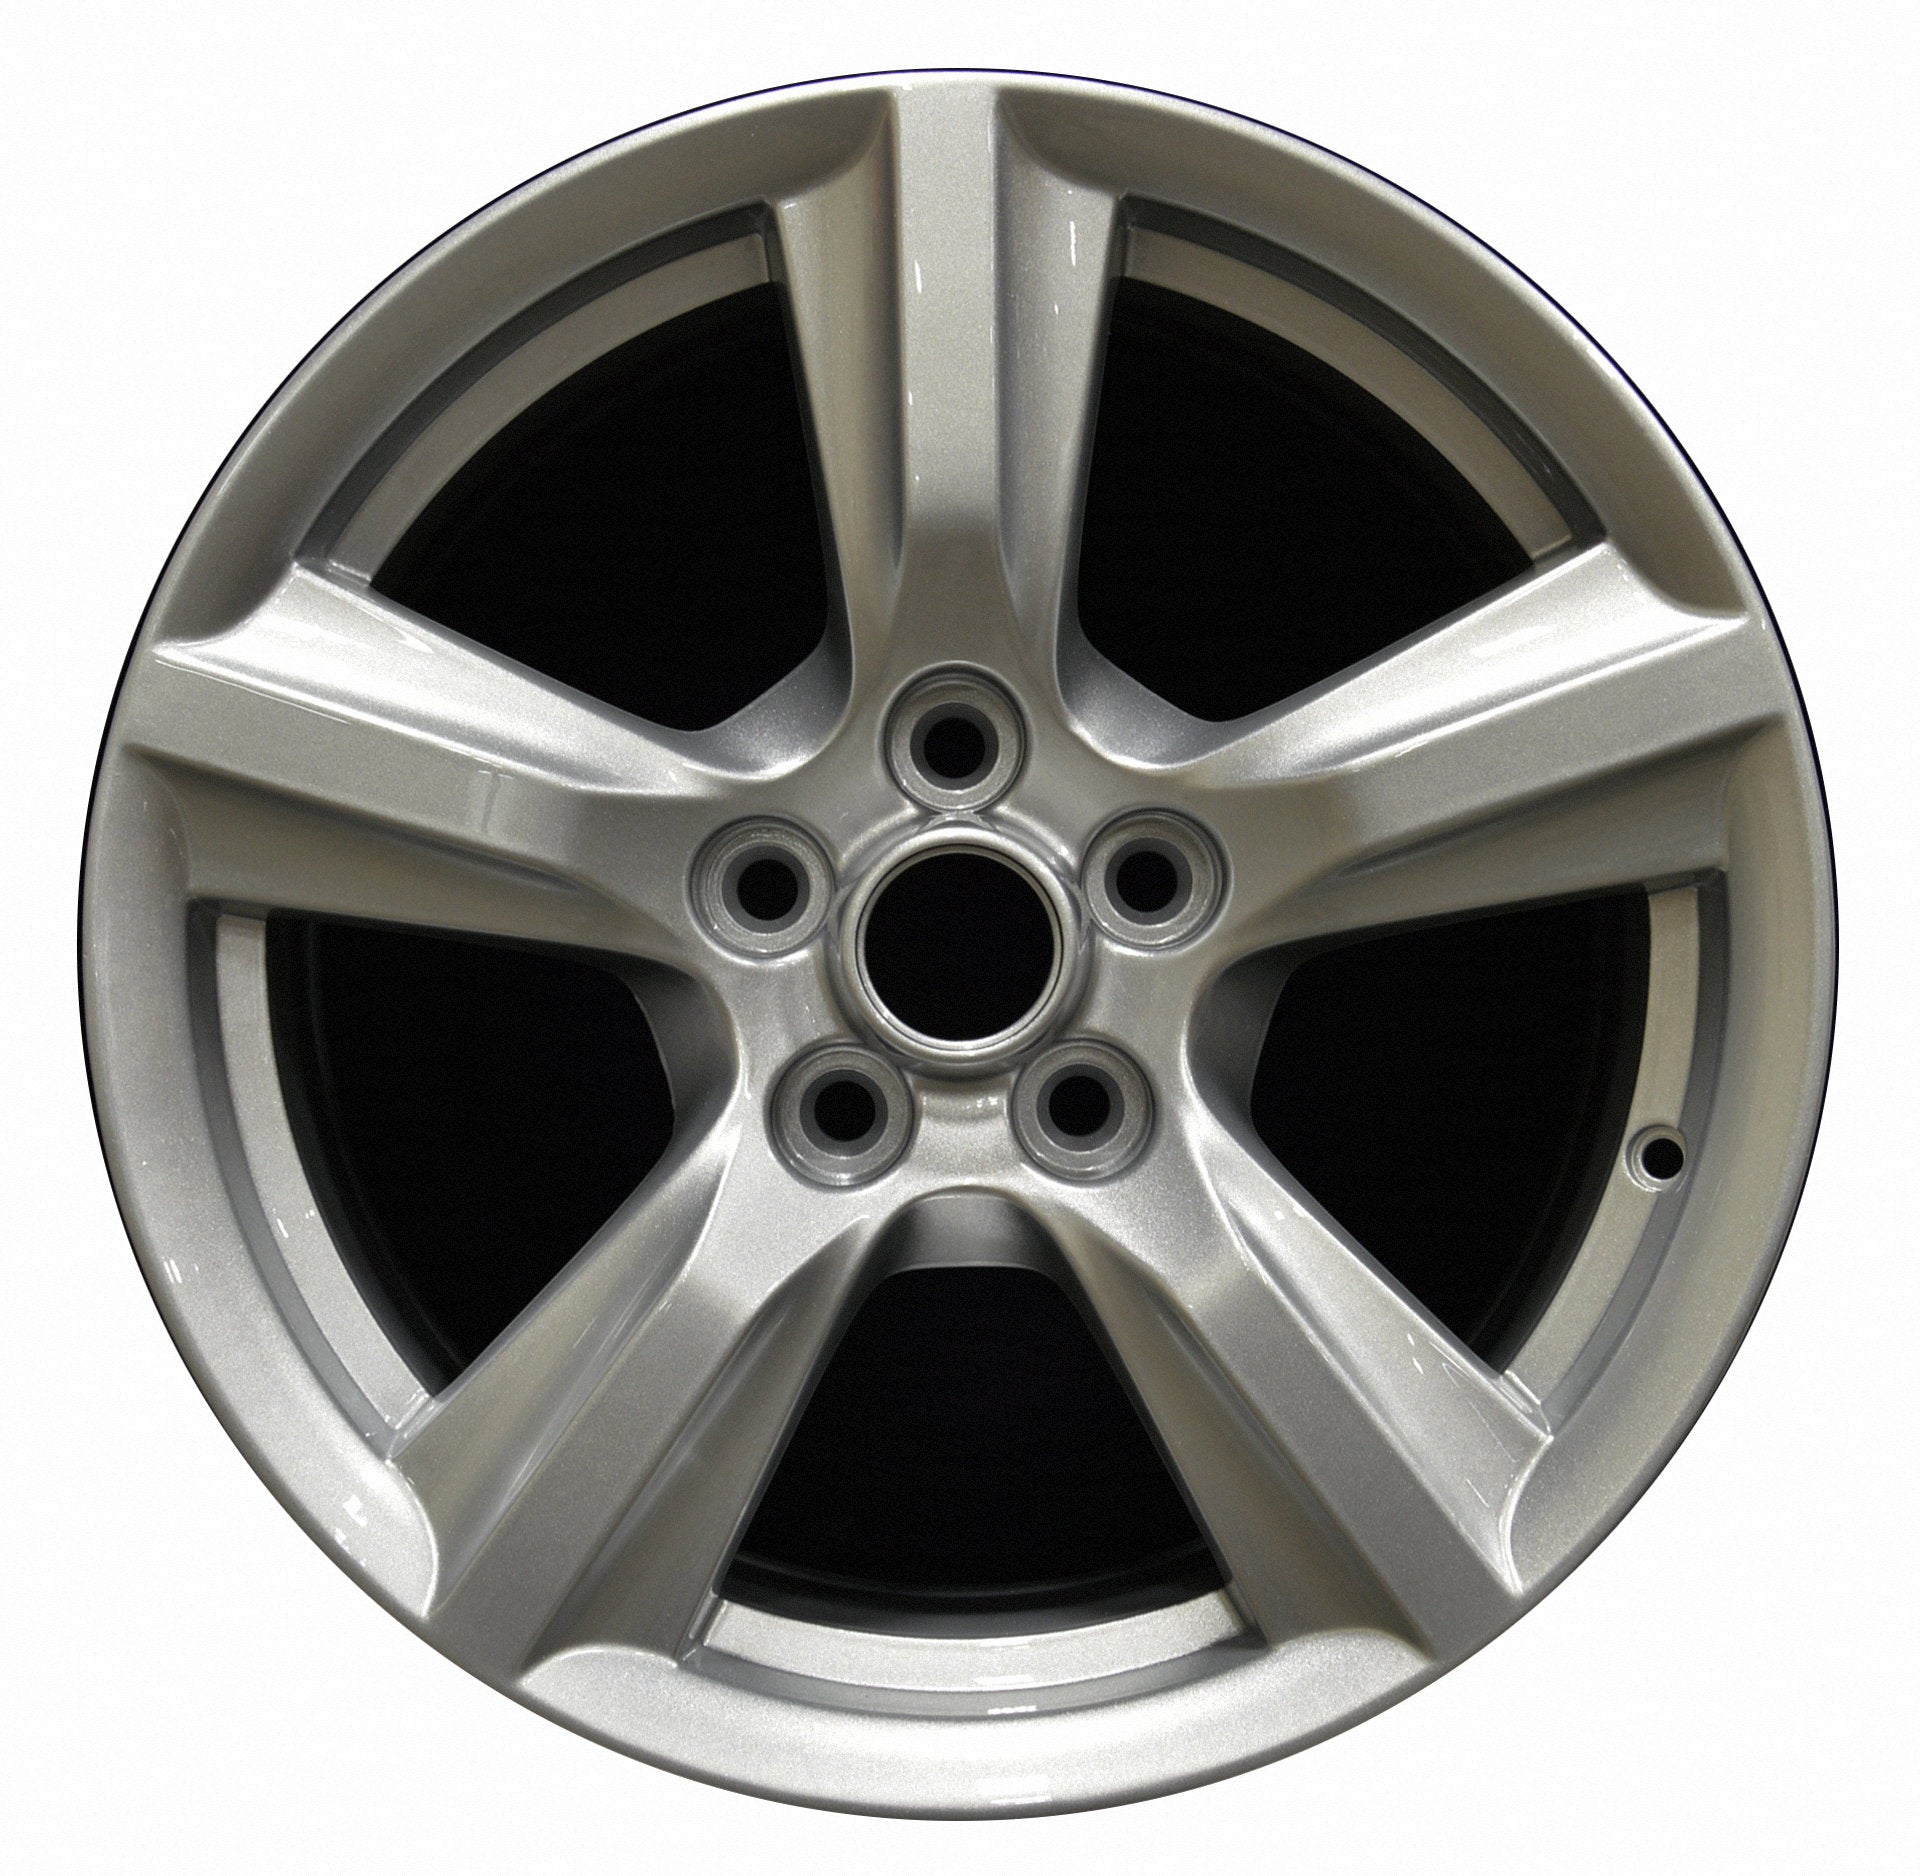 Ford Mustang 17x7.5 OEM Alloy Rim 2015-2019 A.10027.PS08.FF